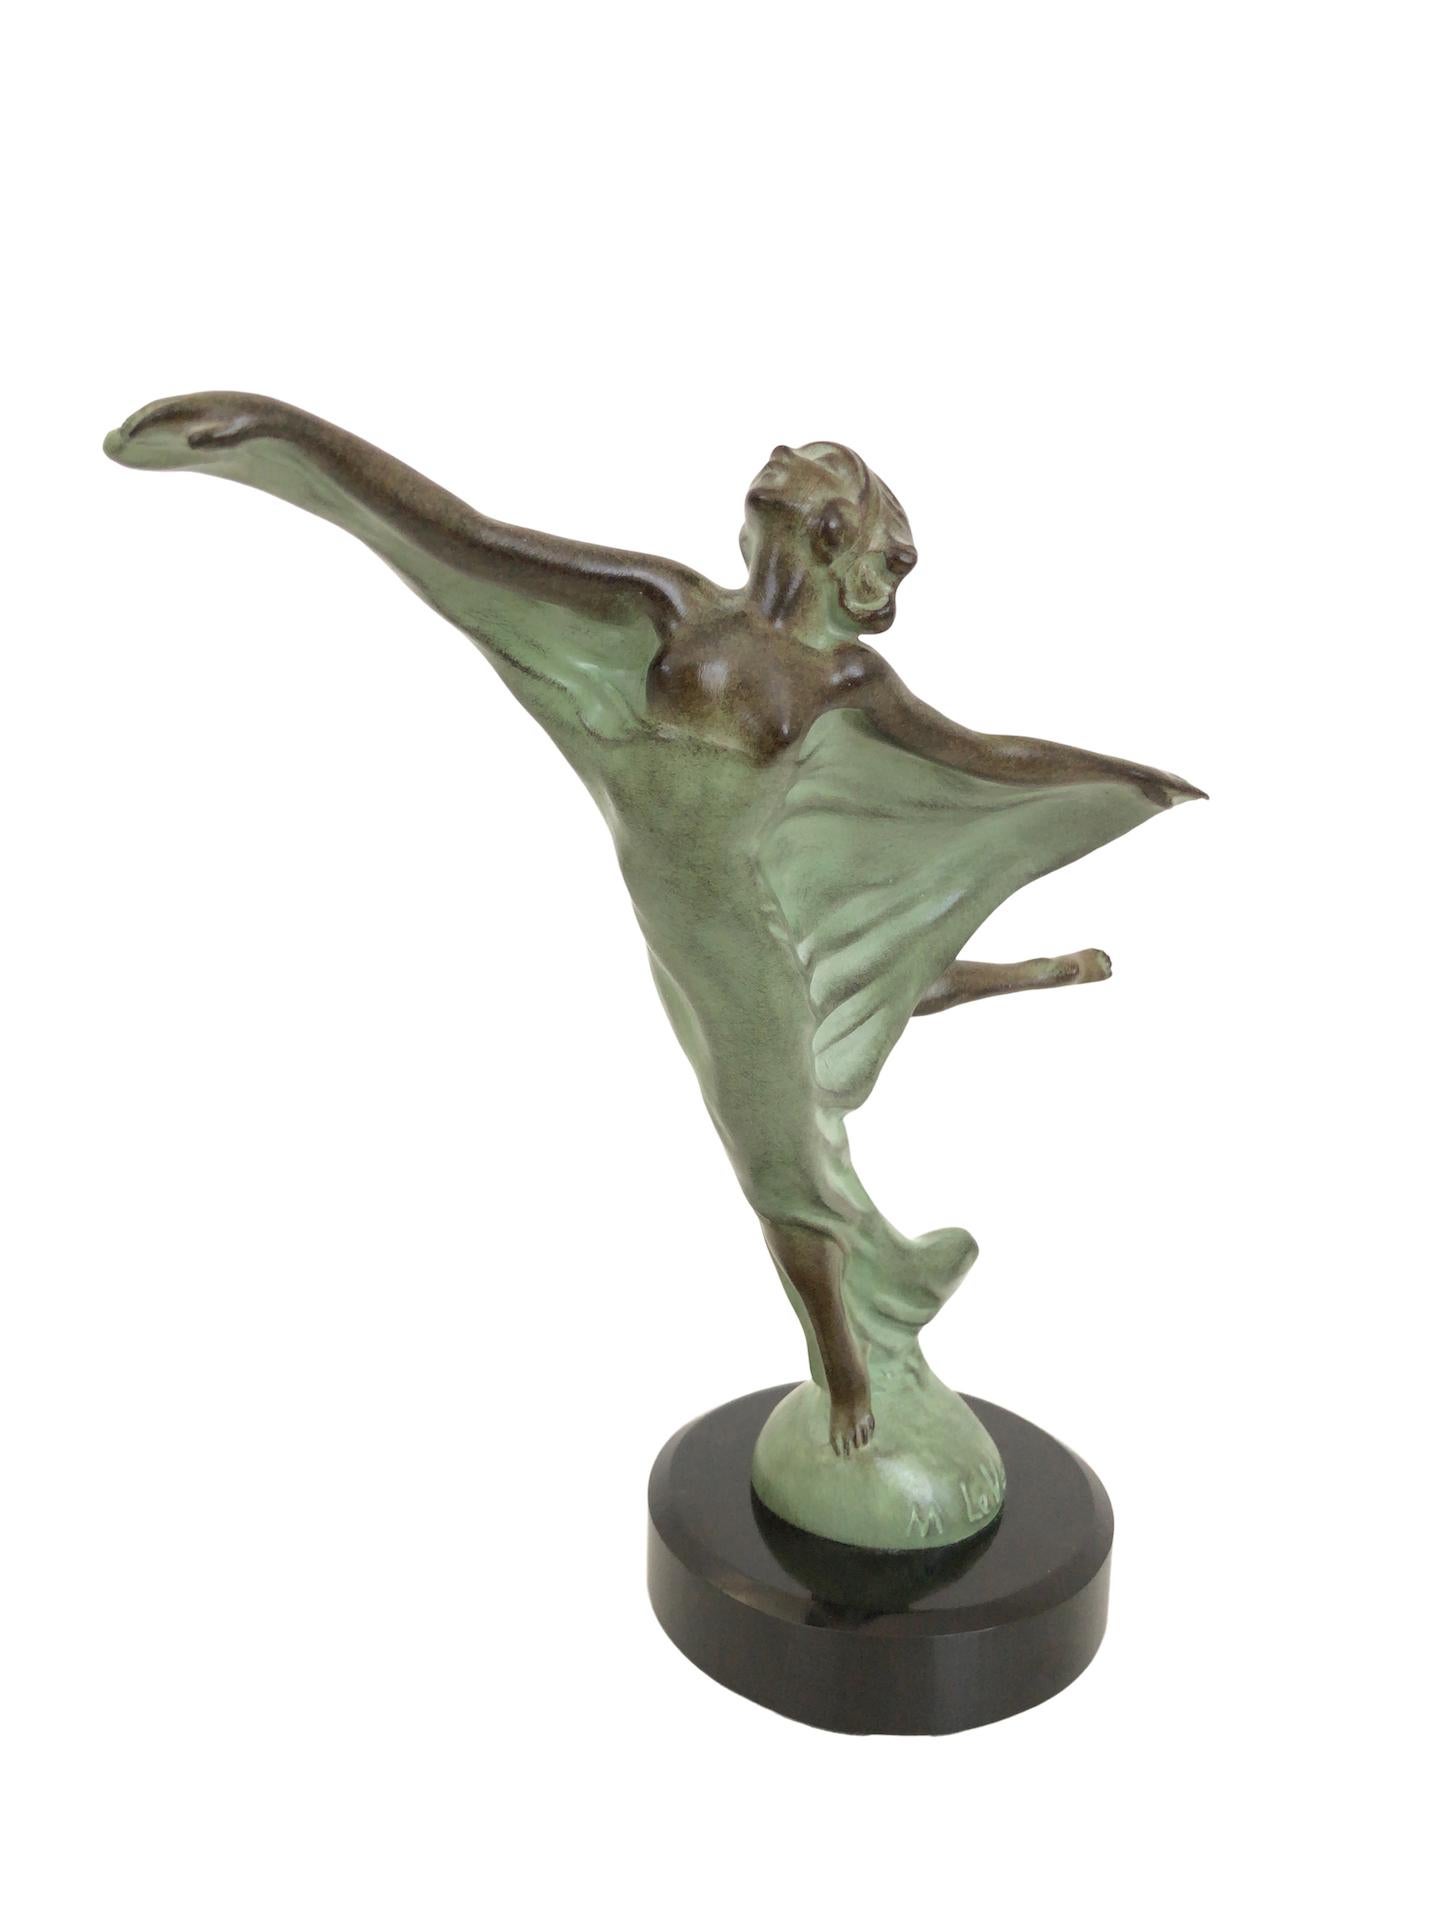 Patinated Sculpture Envol Dancer French Art Deco Style Radiator Mascot from Max Le Verrier